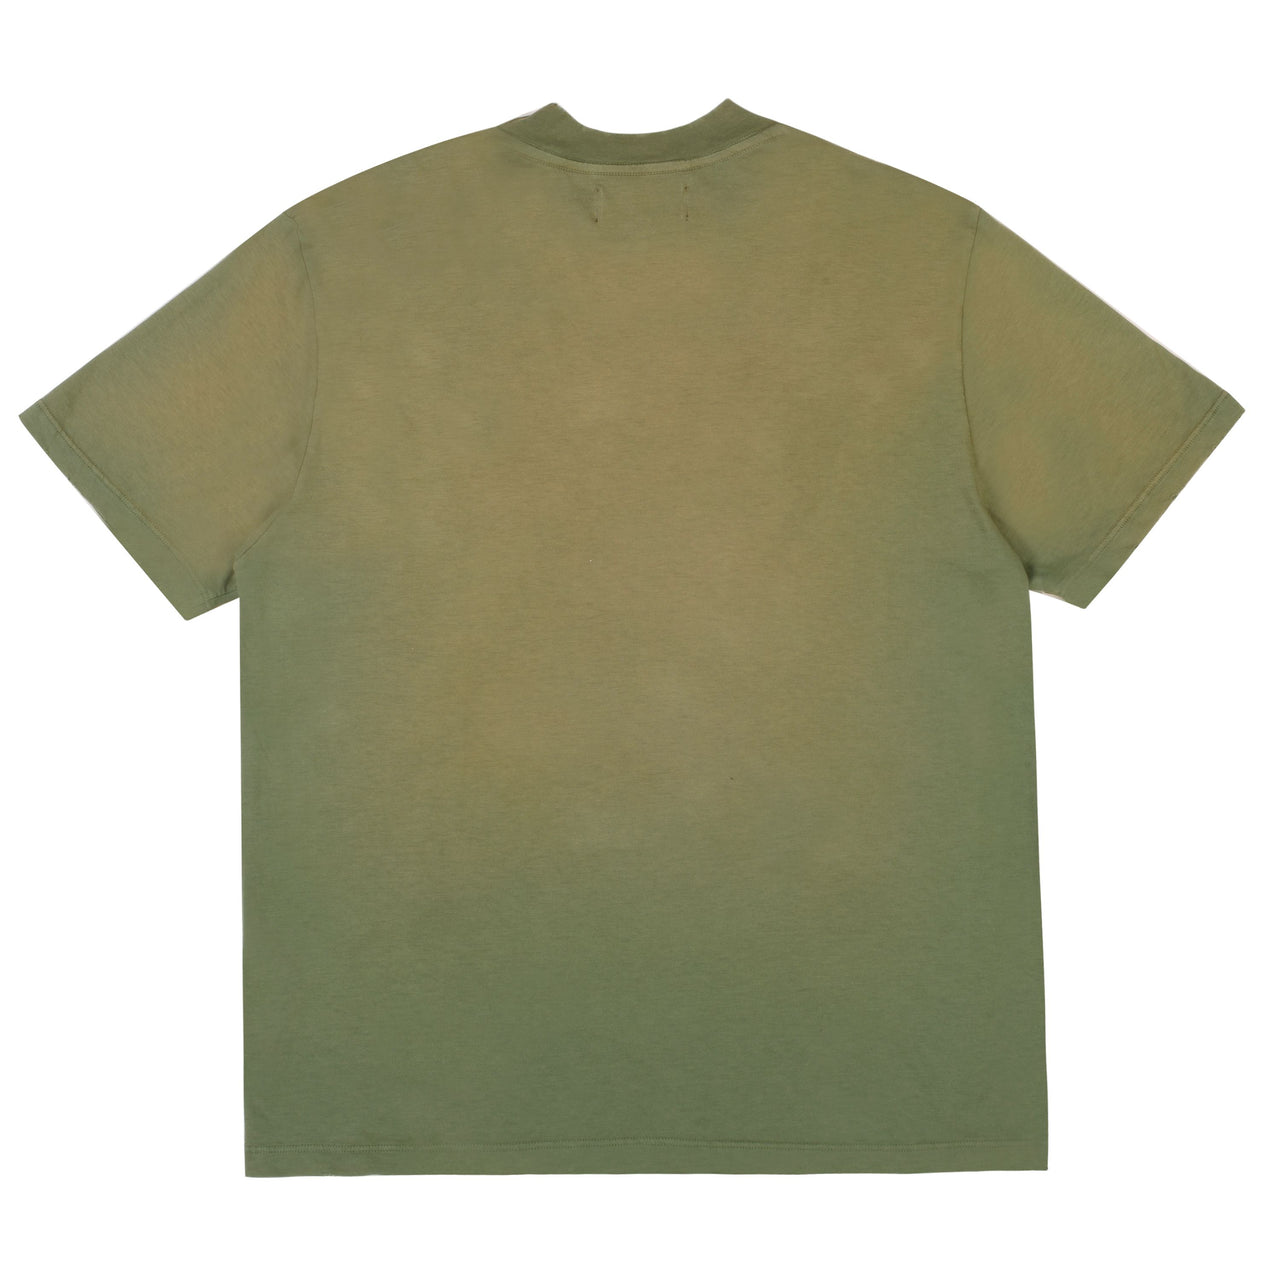 Pieces Army Tee Washed Olive